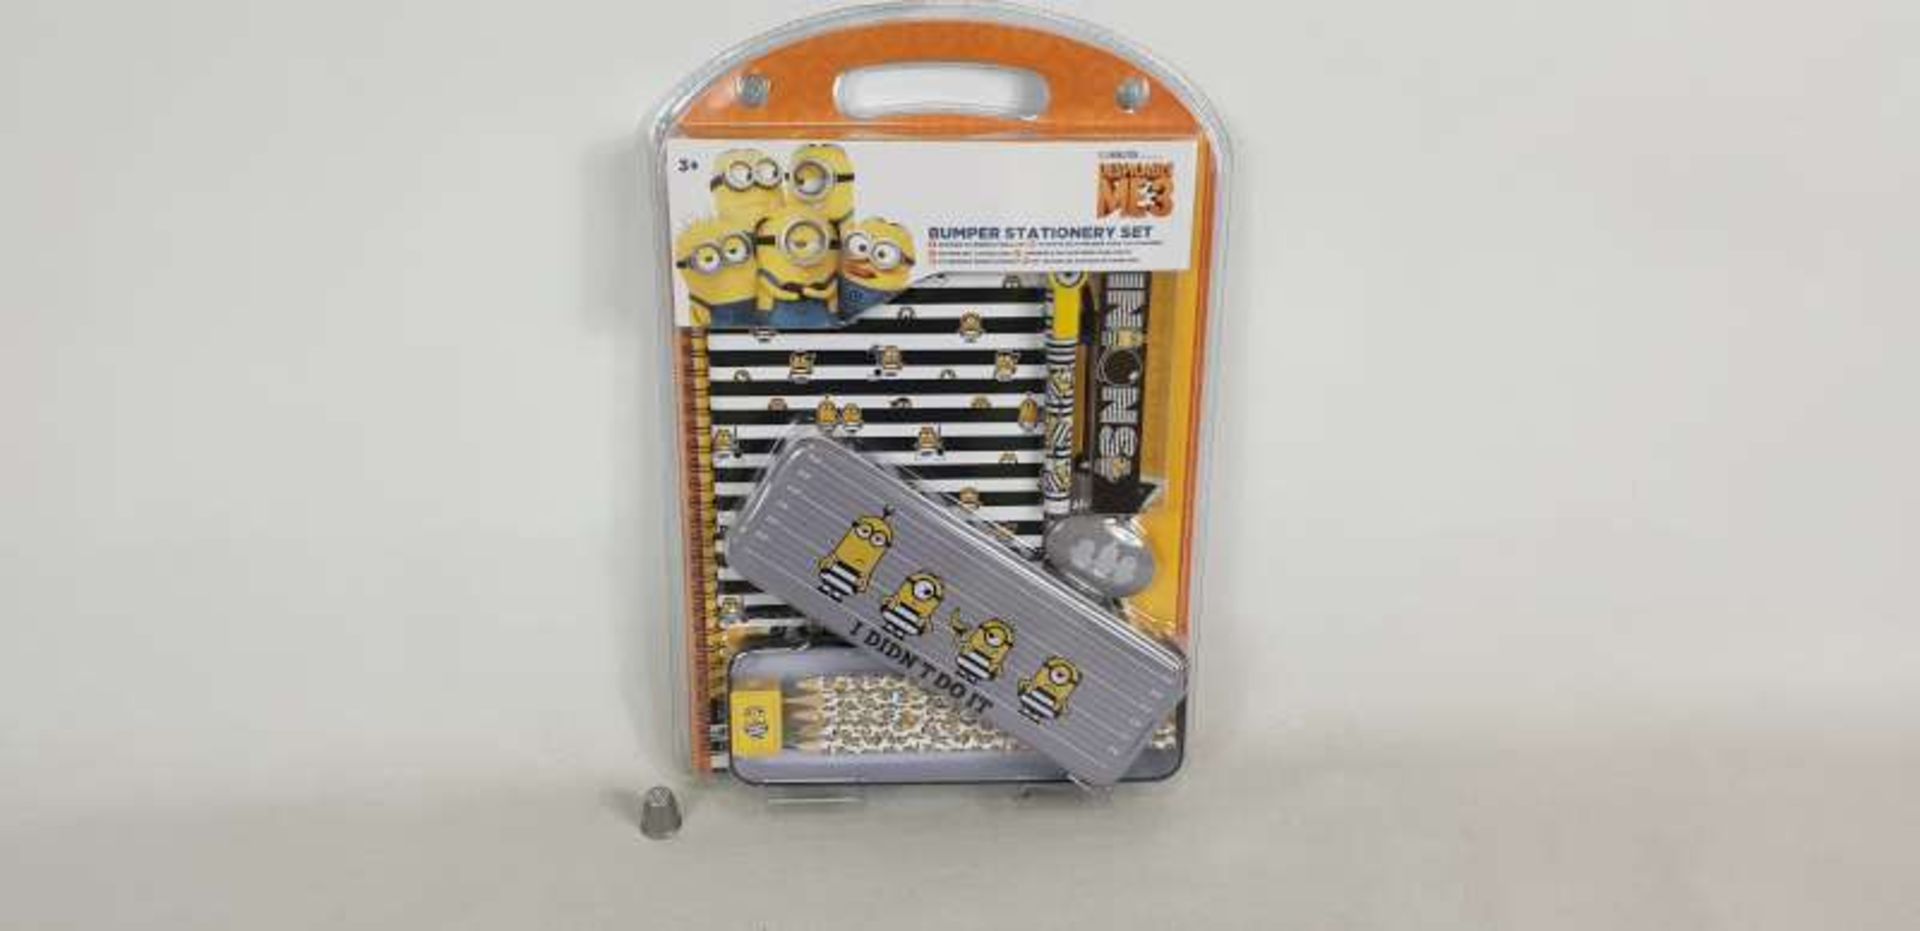 48 X DESPICABLE ME BUMPER STATIONERY SETS IN 4 BOXES